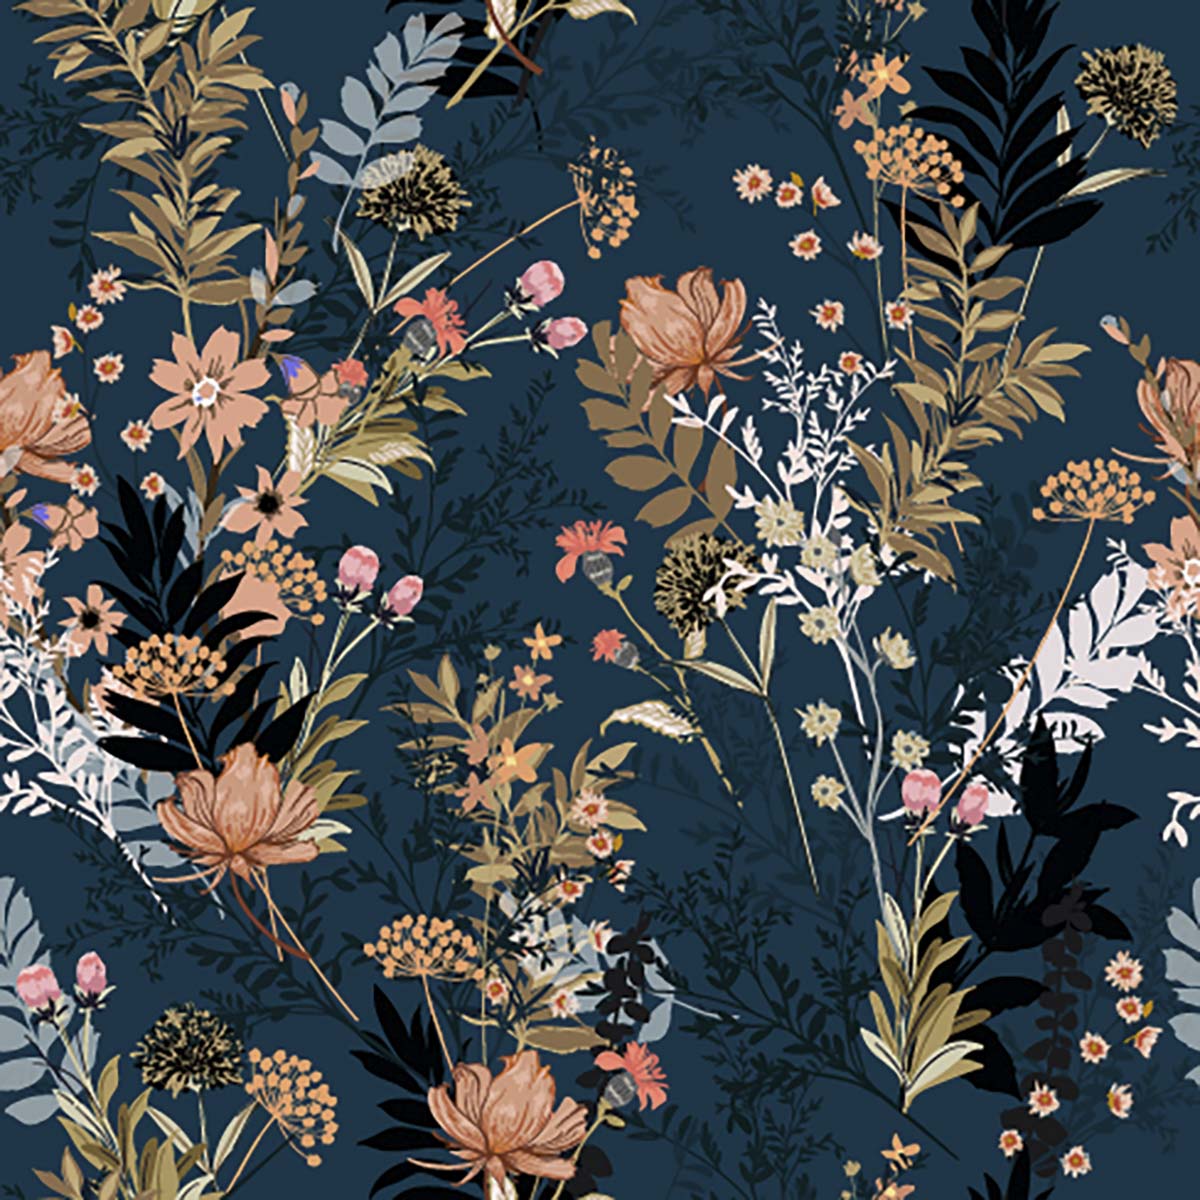 A floral pattern on a blue background